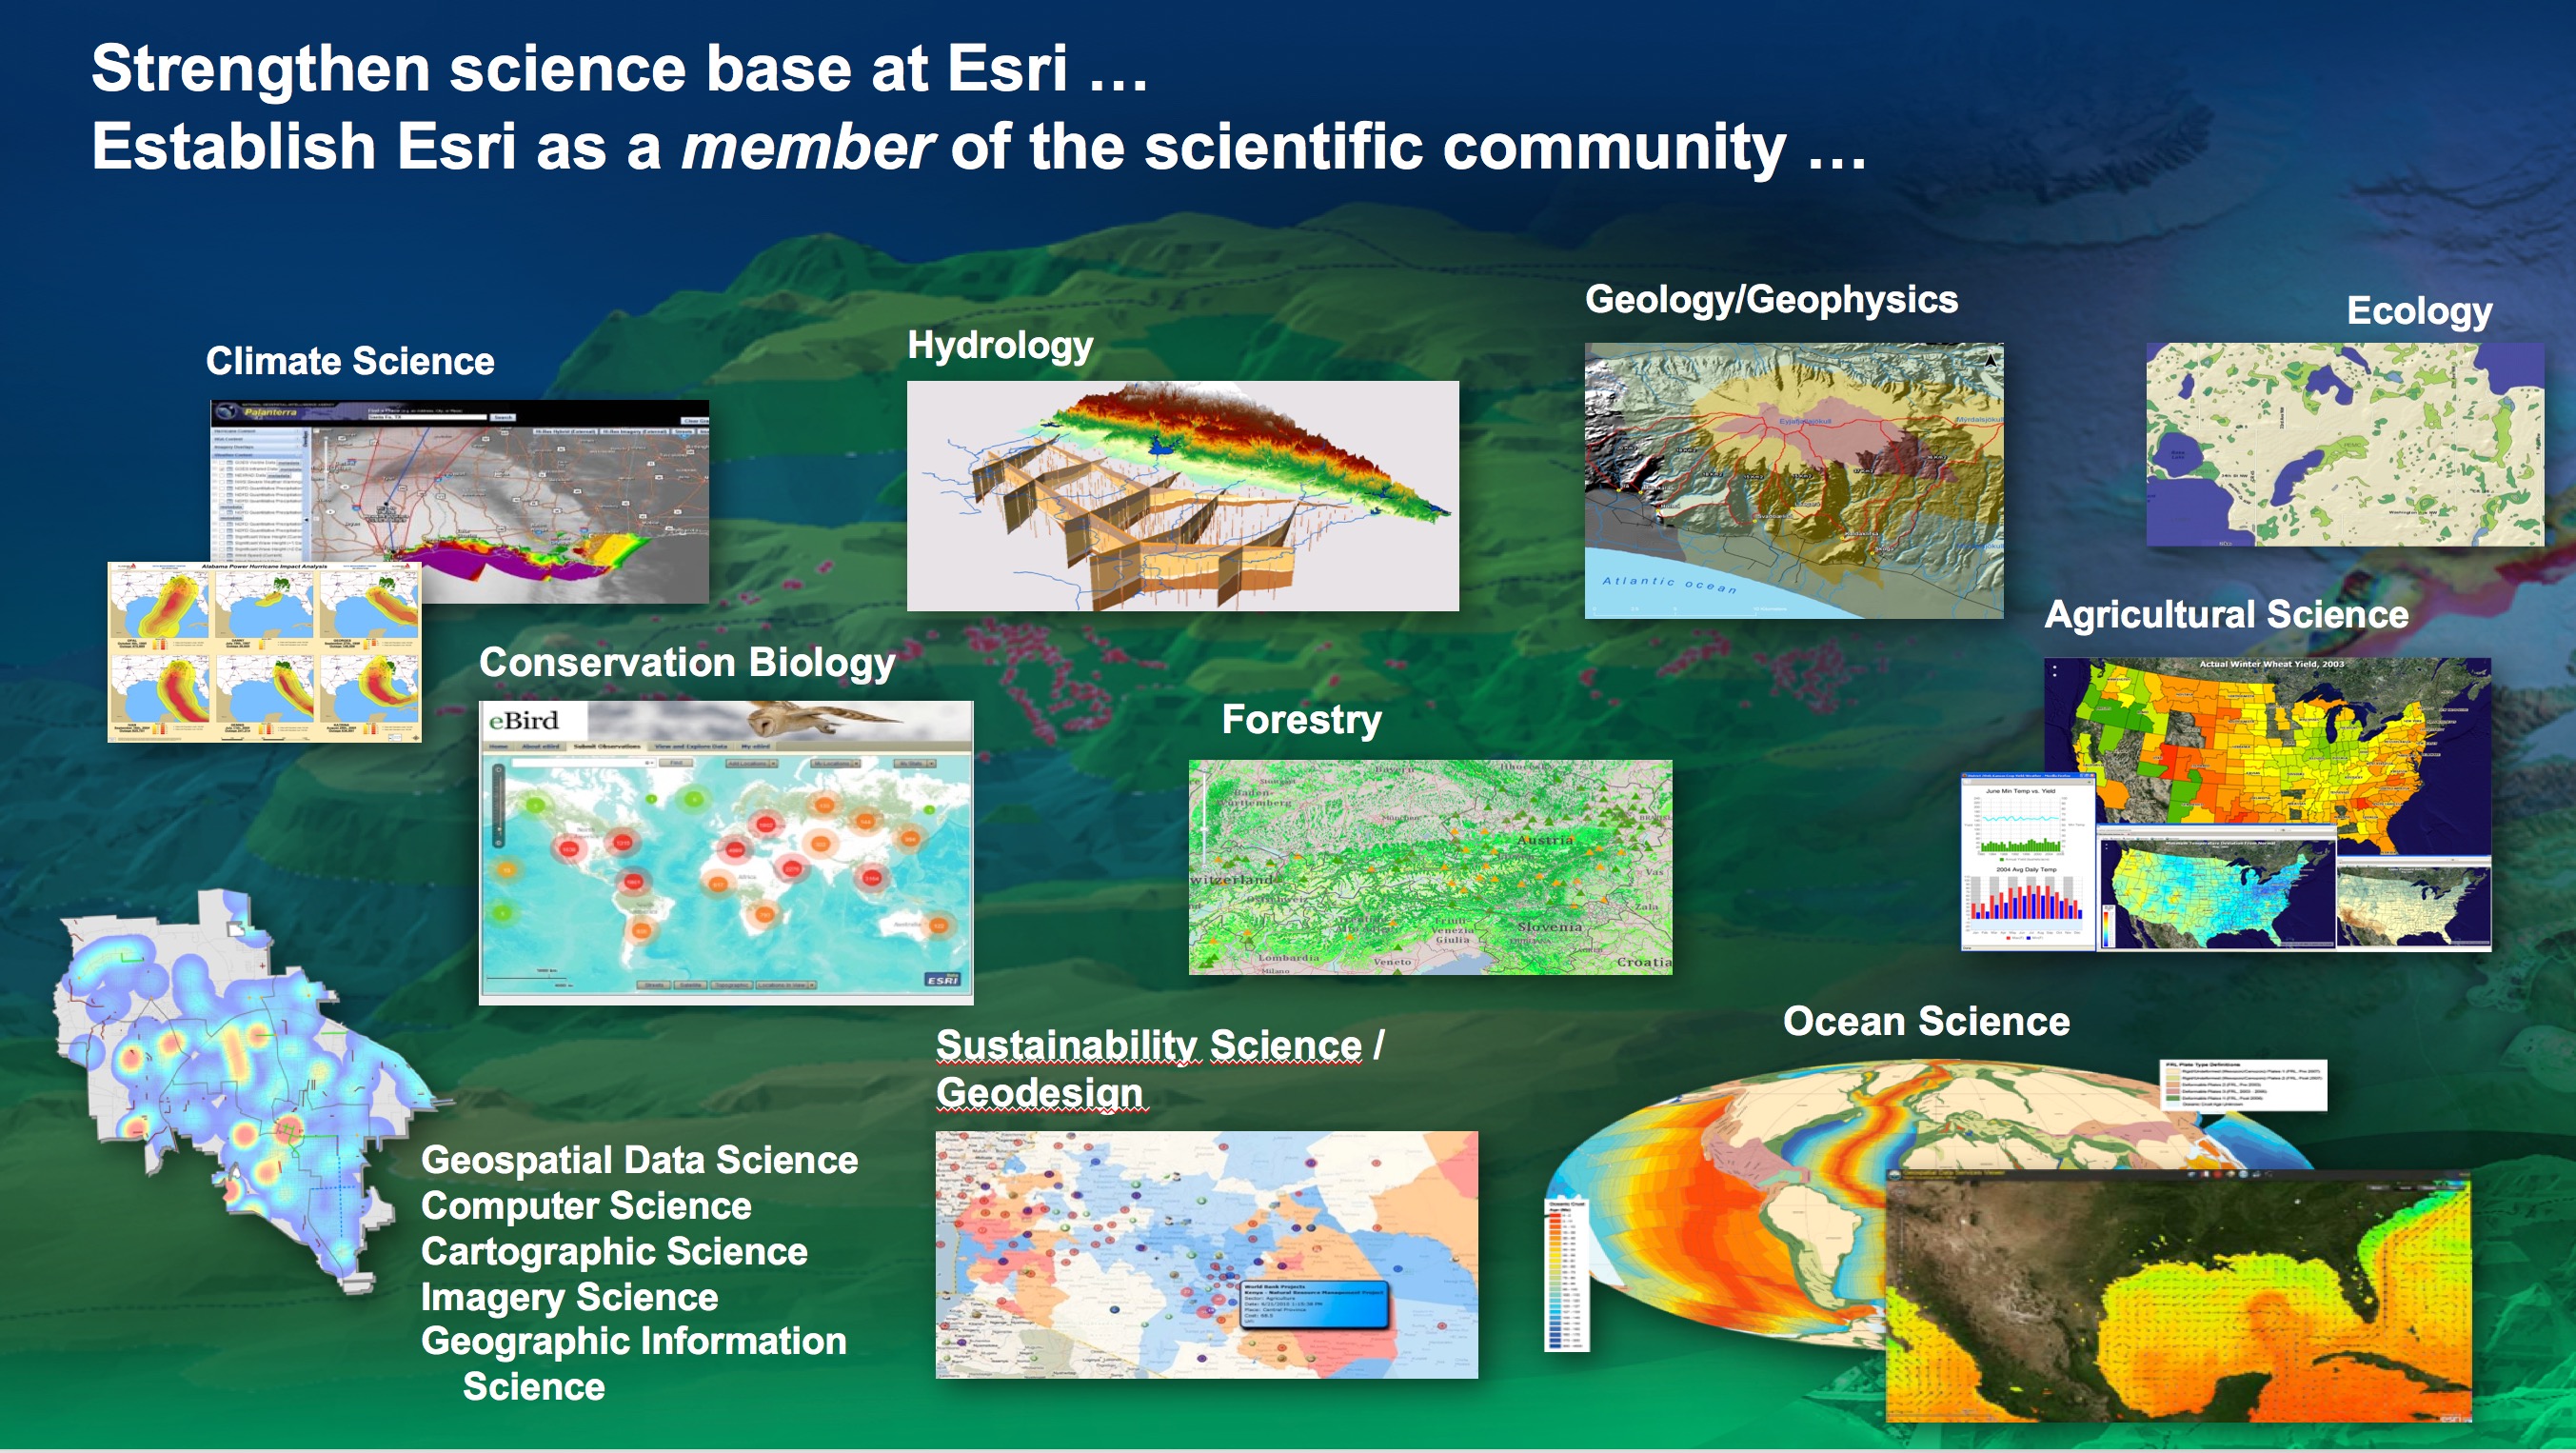 There are many natural science domains in which GIS is being used effectively to understand how the Earth works. At Esri, these are the sciences that we are particularly strong in